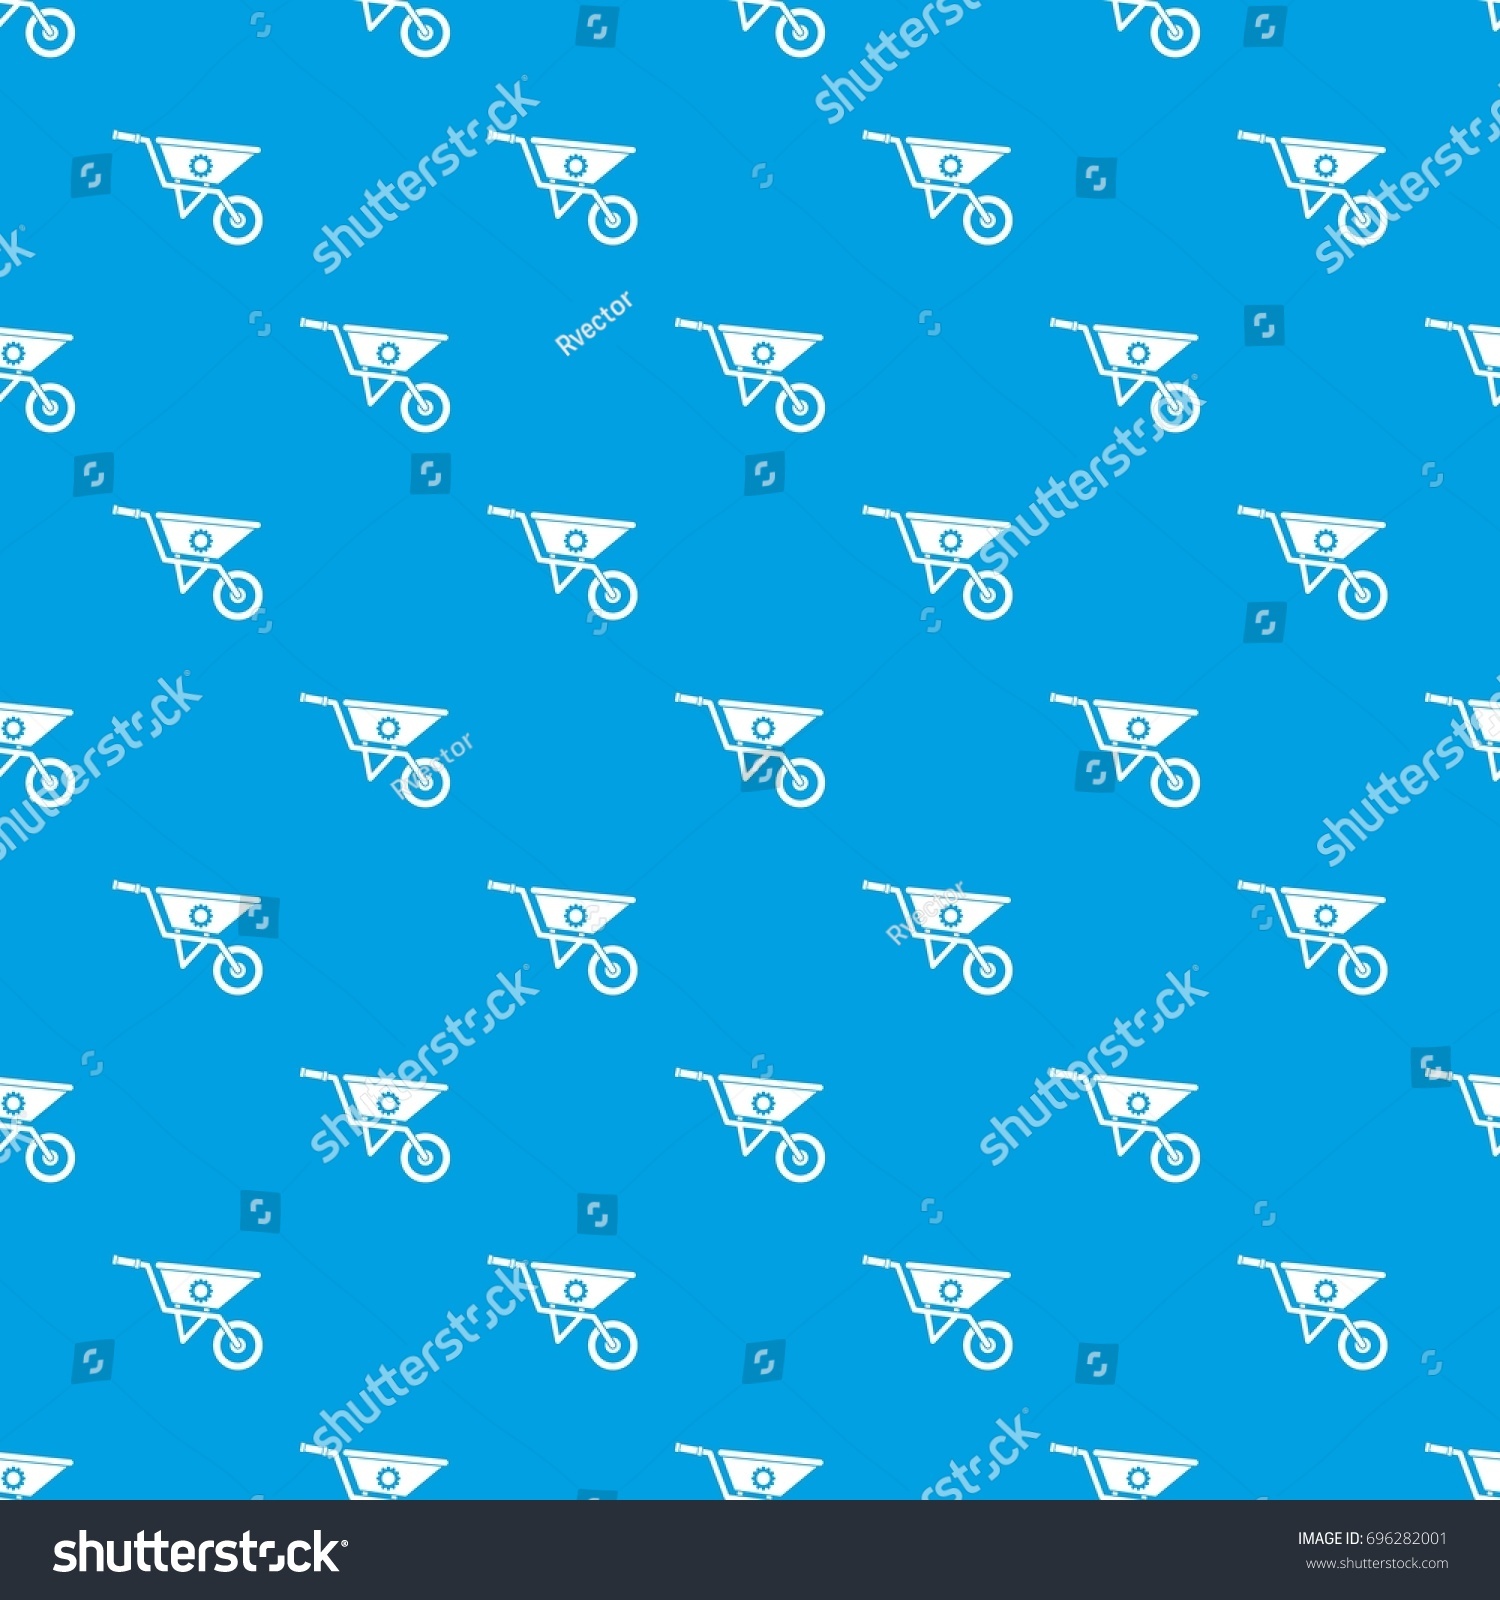 SVG of Wheelbarrow pattern repeat seamless in blue color for any design. Vector geometric illustration svg